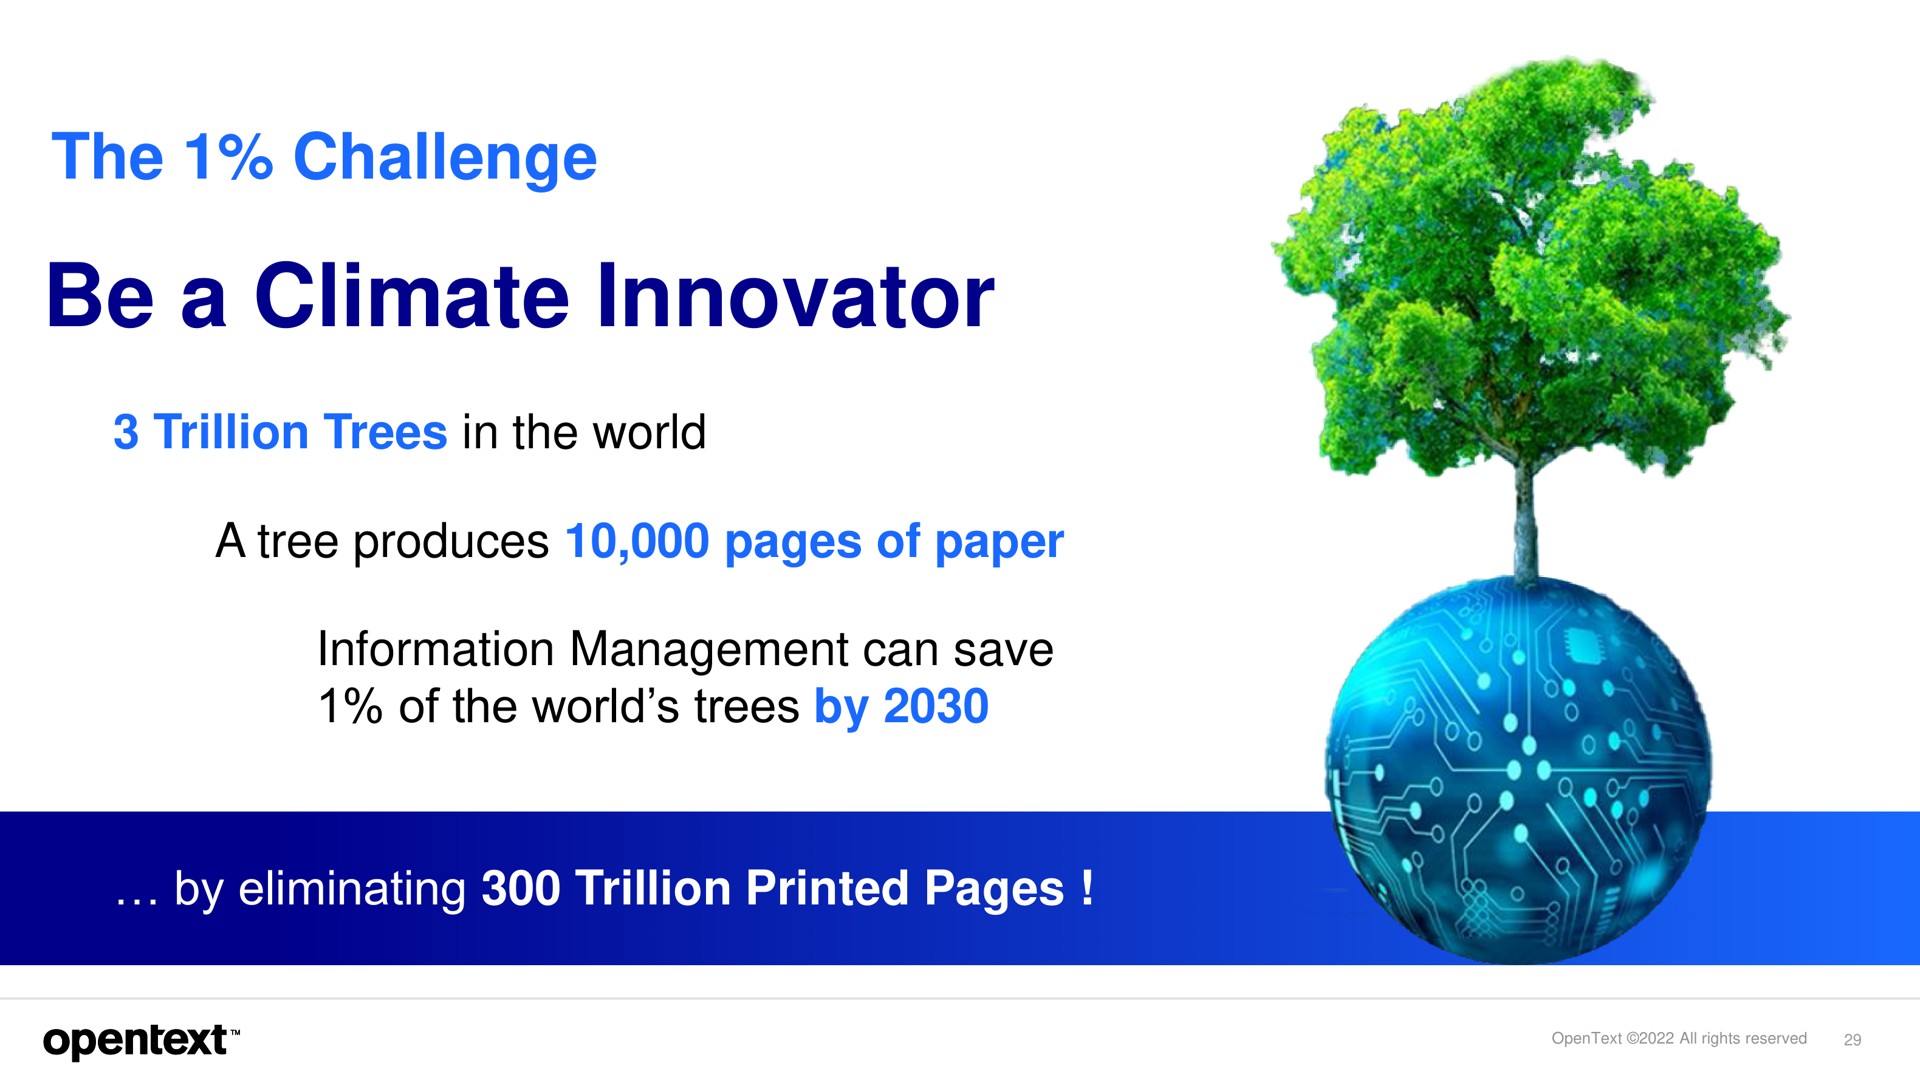 the challenge be a climate innovator trillion trees in world produces pages of paper information management can save of world trees by by eliminating trillion printed pages | OpenText